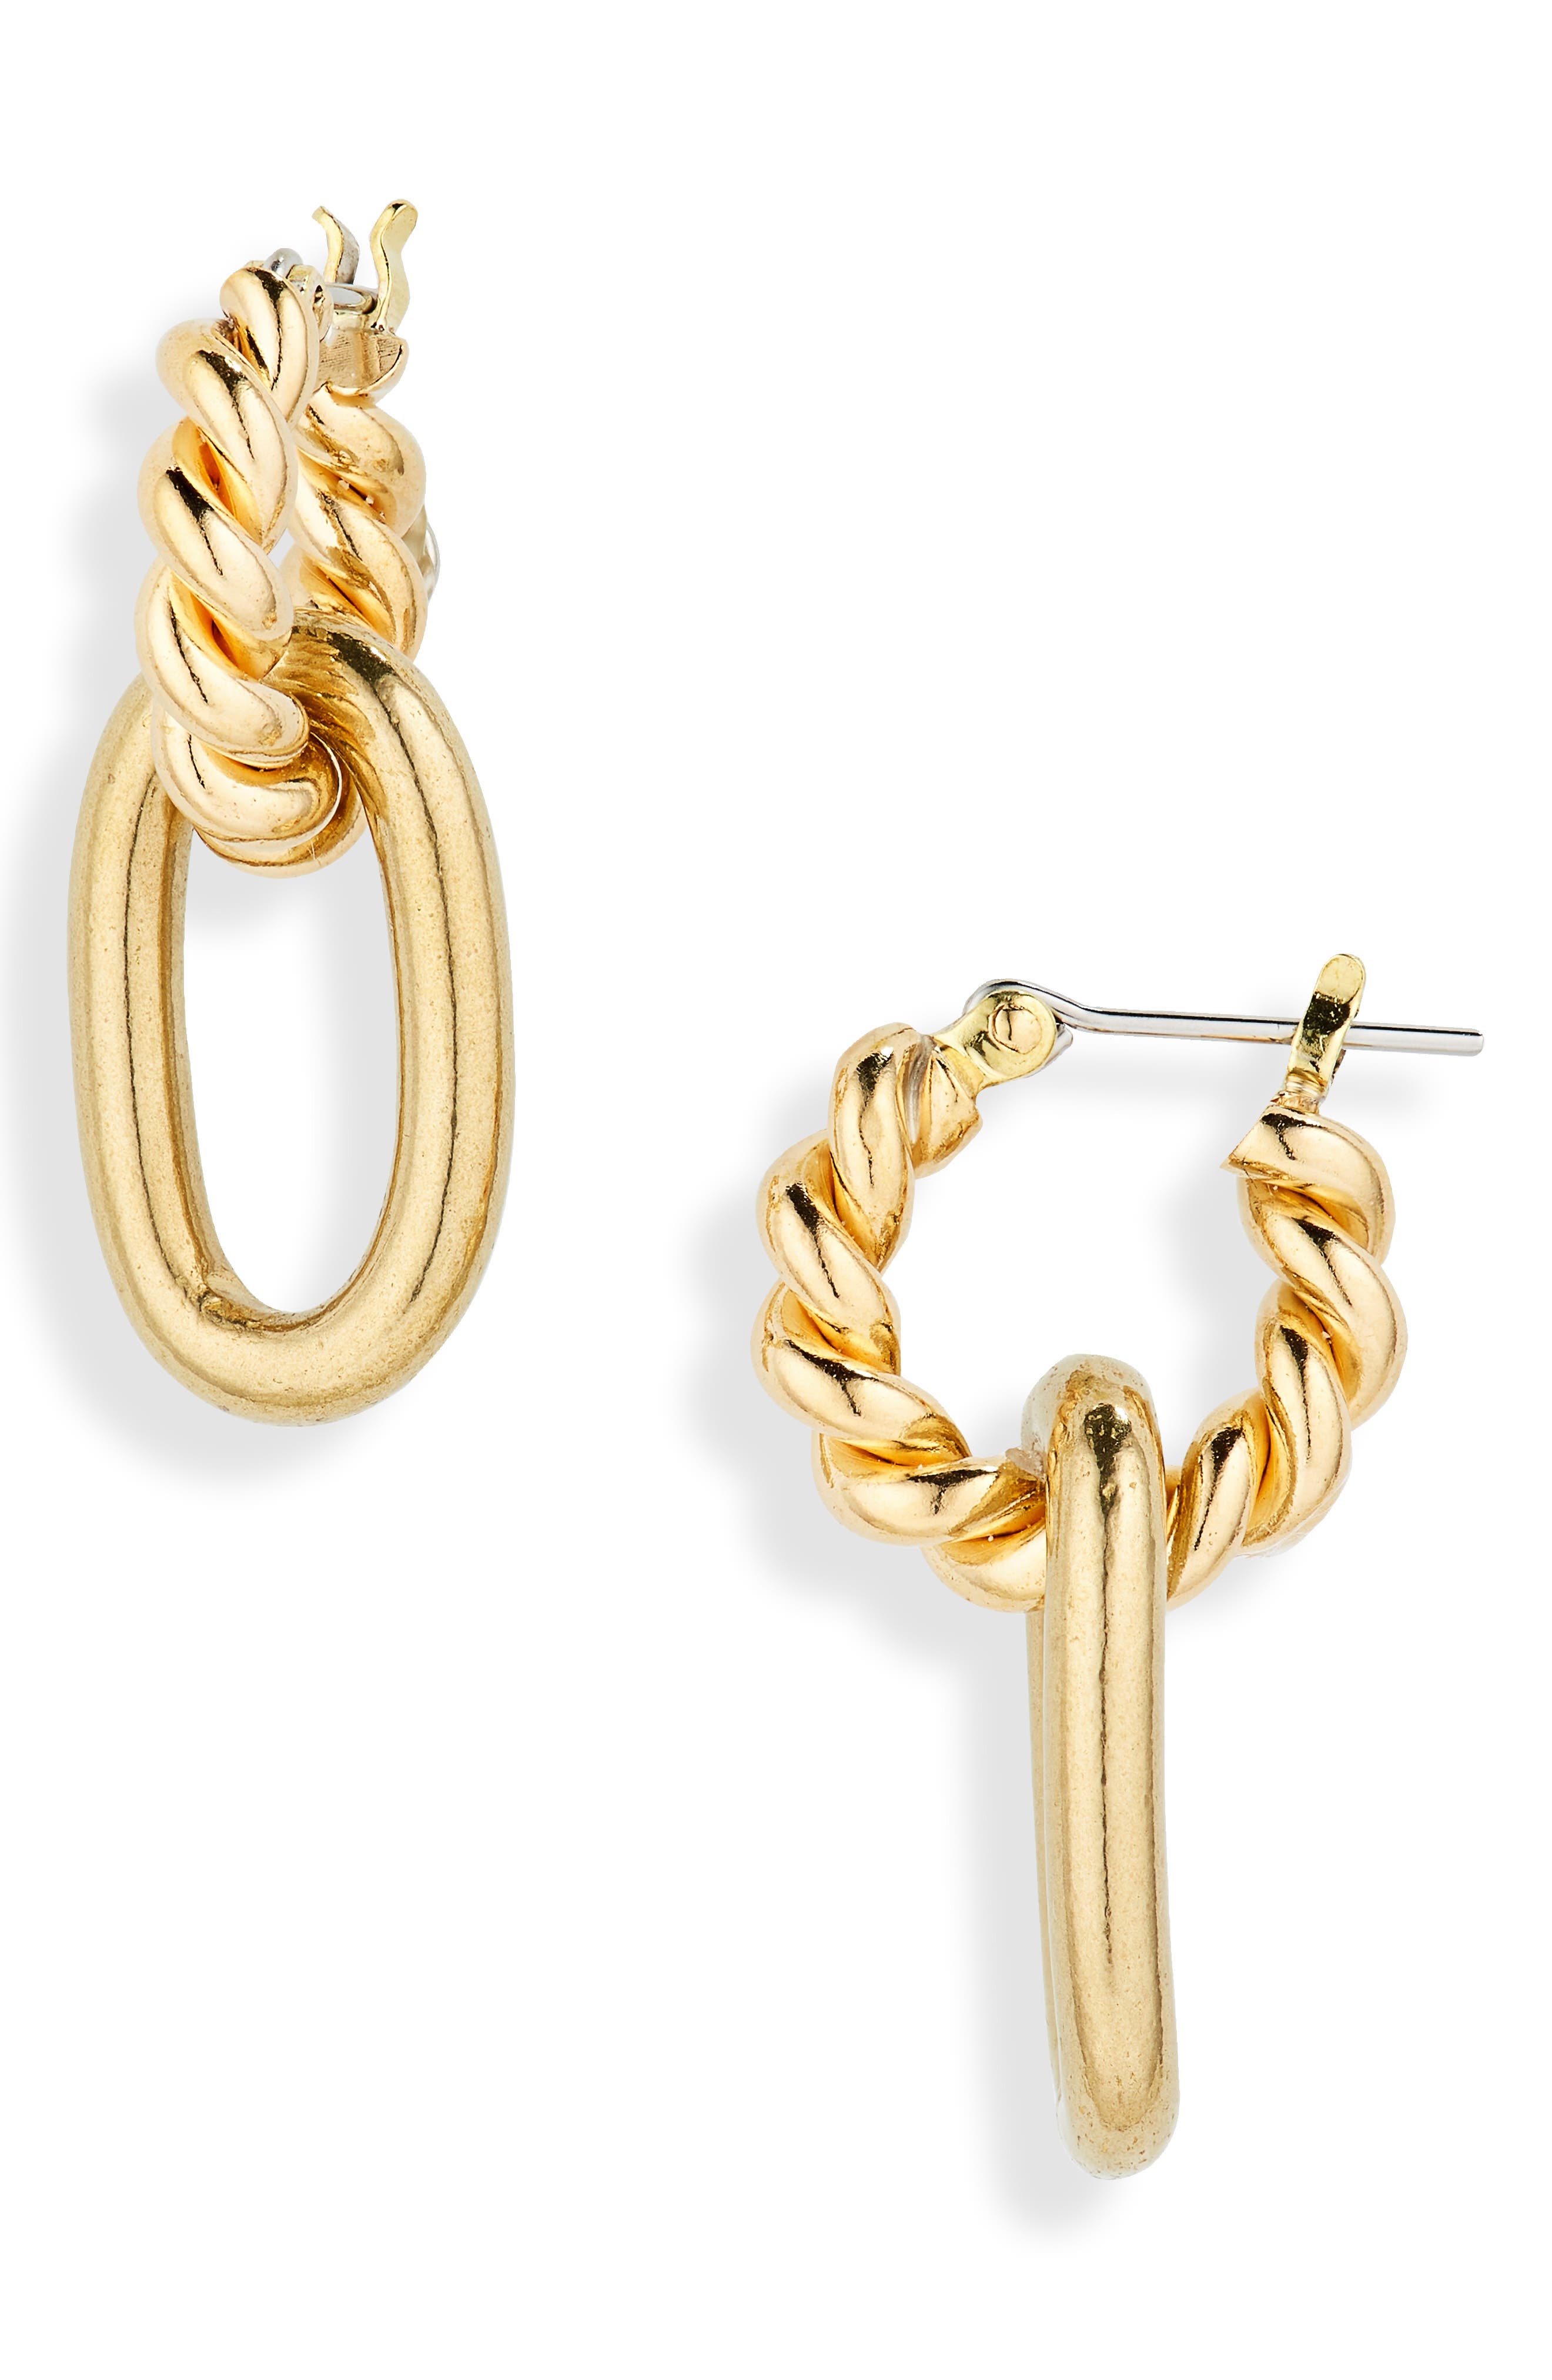 Laura Lombardi Braided Cable Link Drop Earrings in Brass at Nordstrom